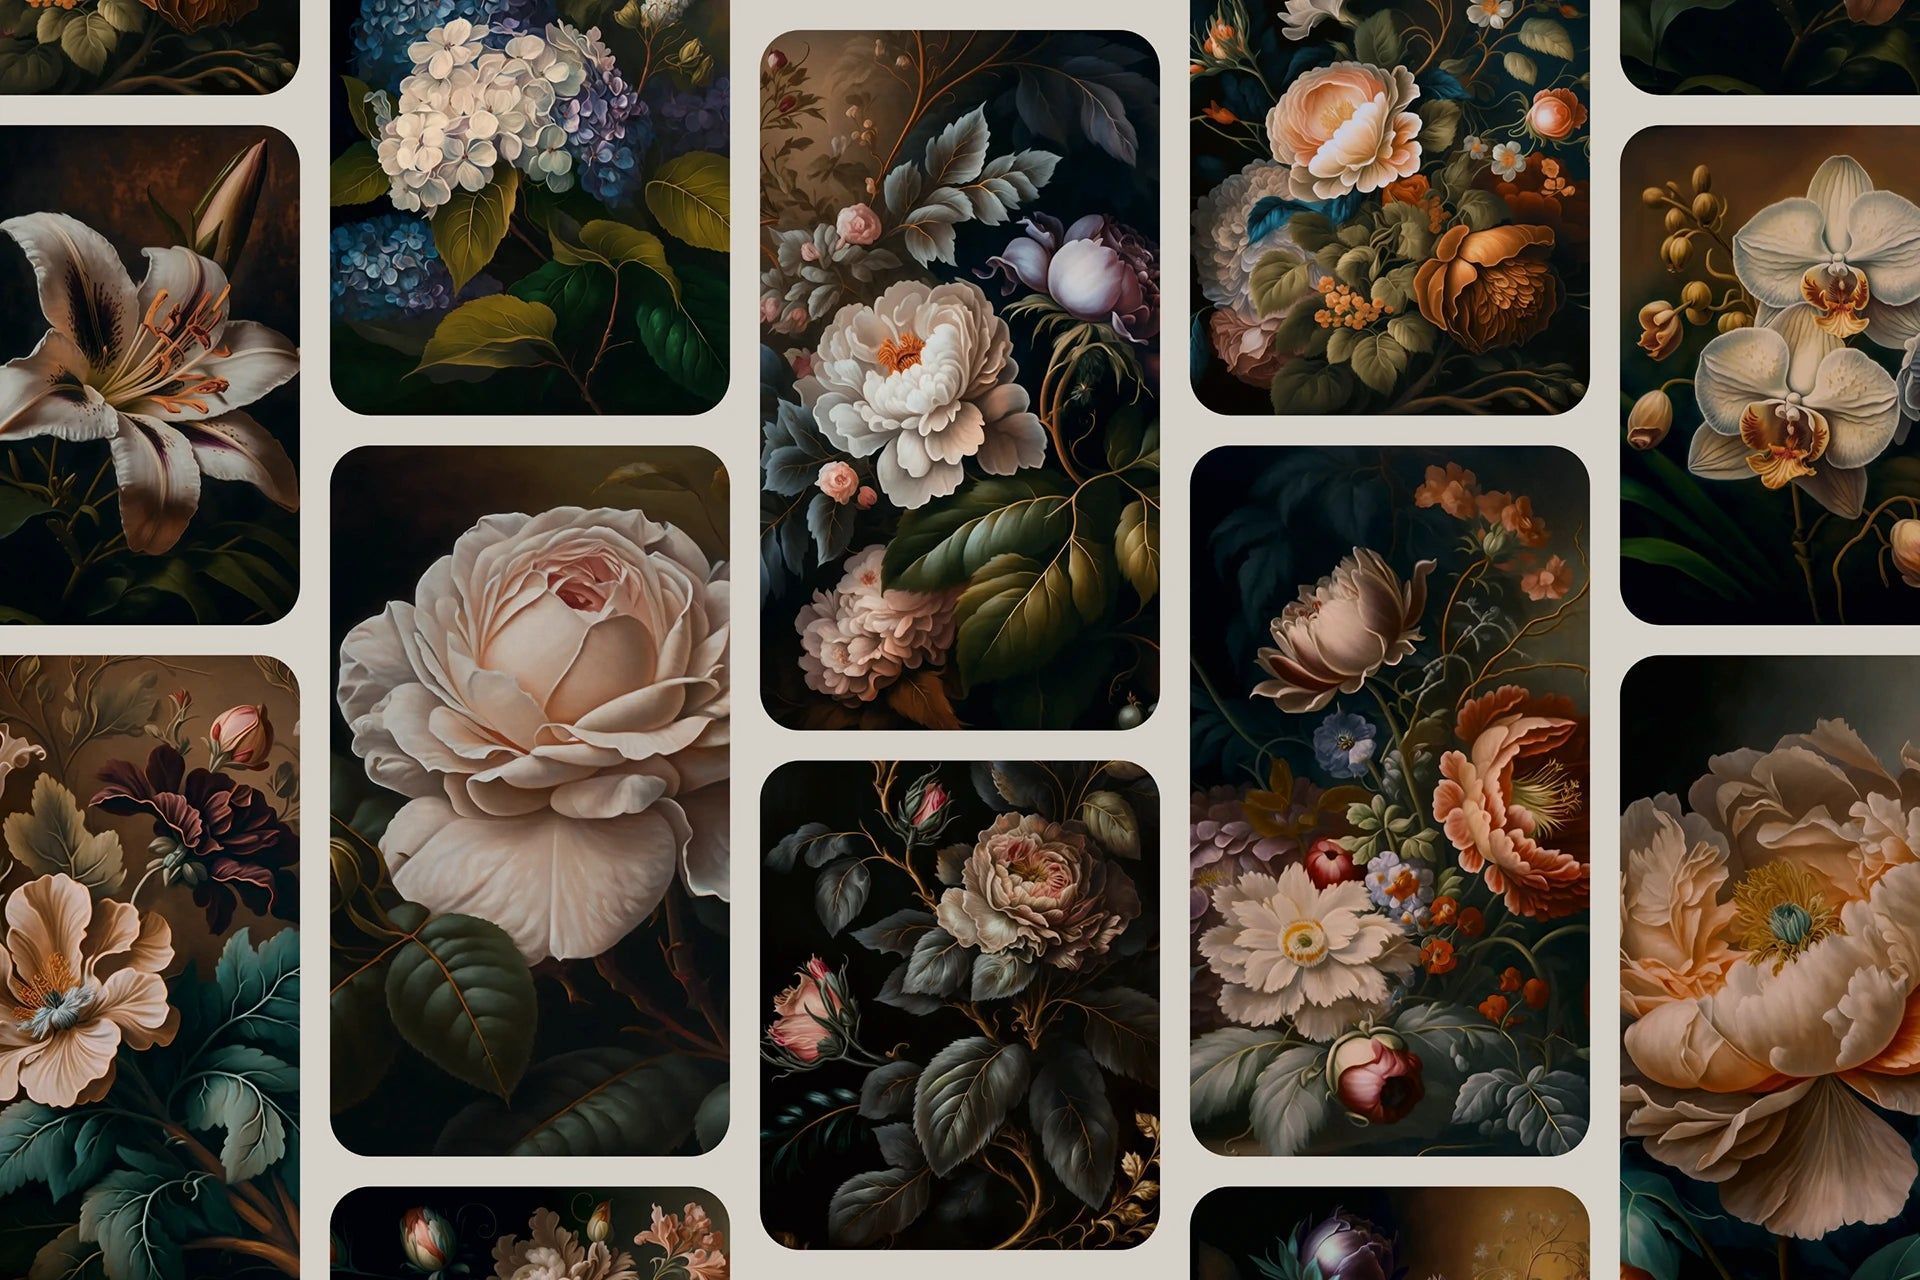 A collage of floral images from the collection - Dark academia